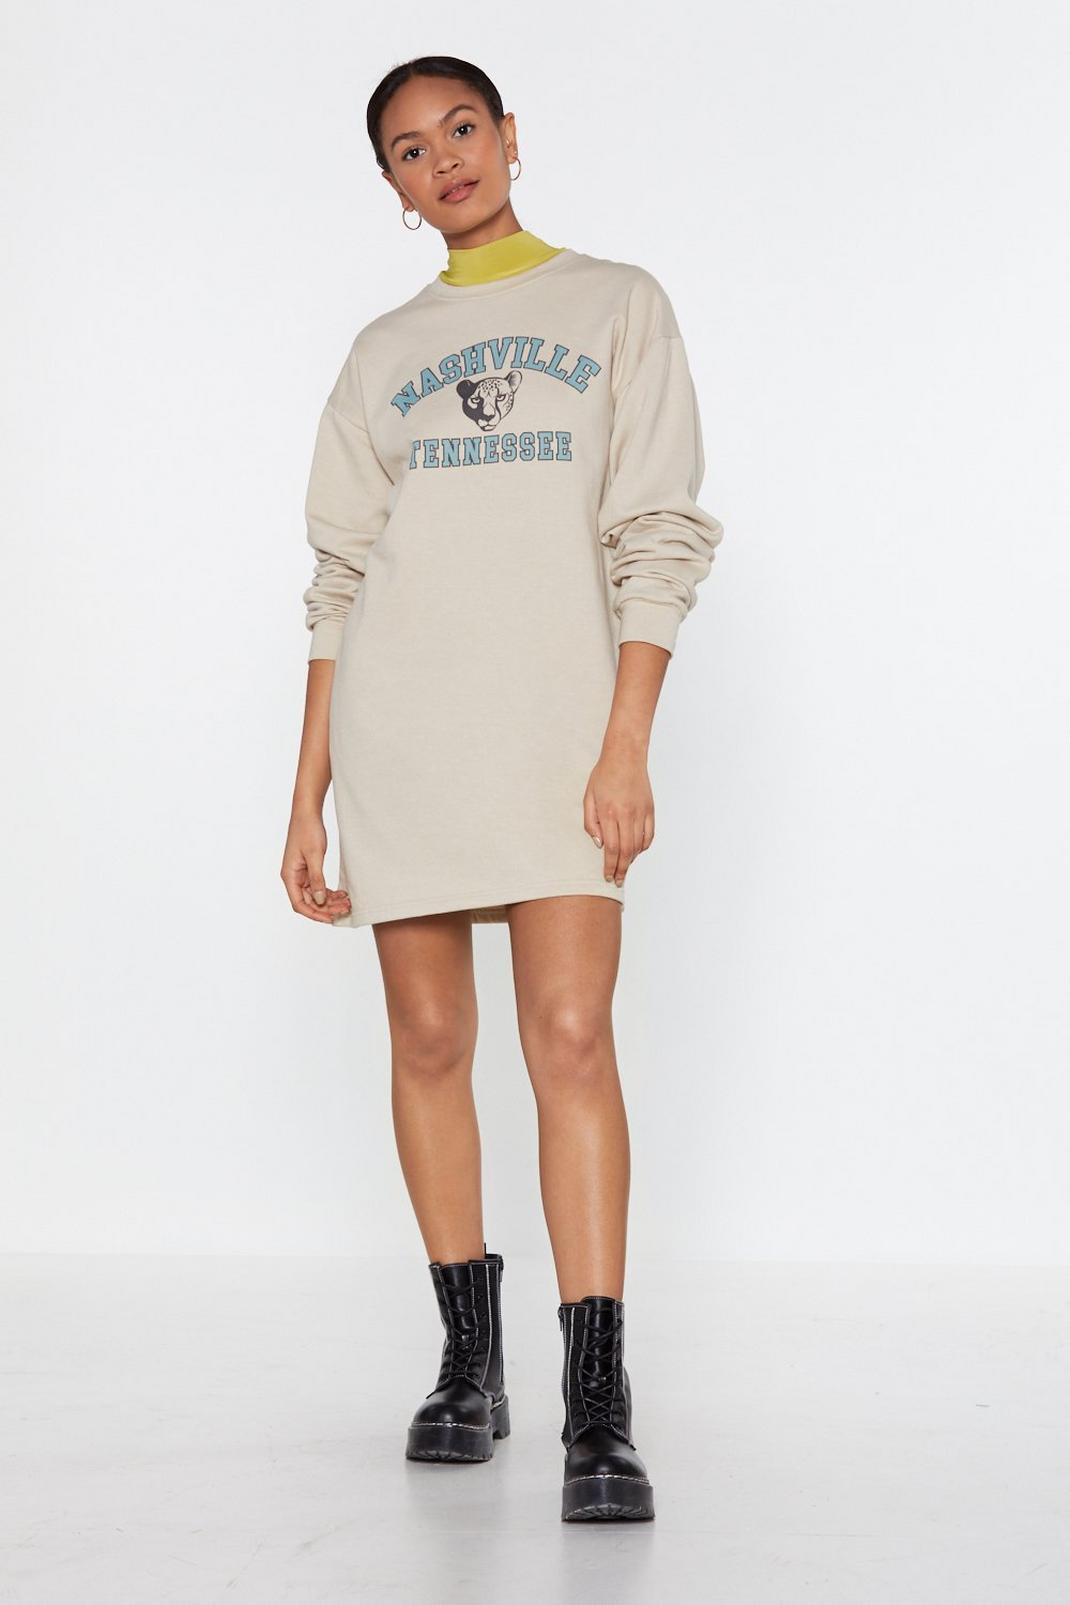 Ten Out of Tennessee Sweatshirt Dress image number 1